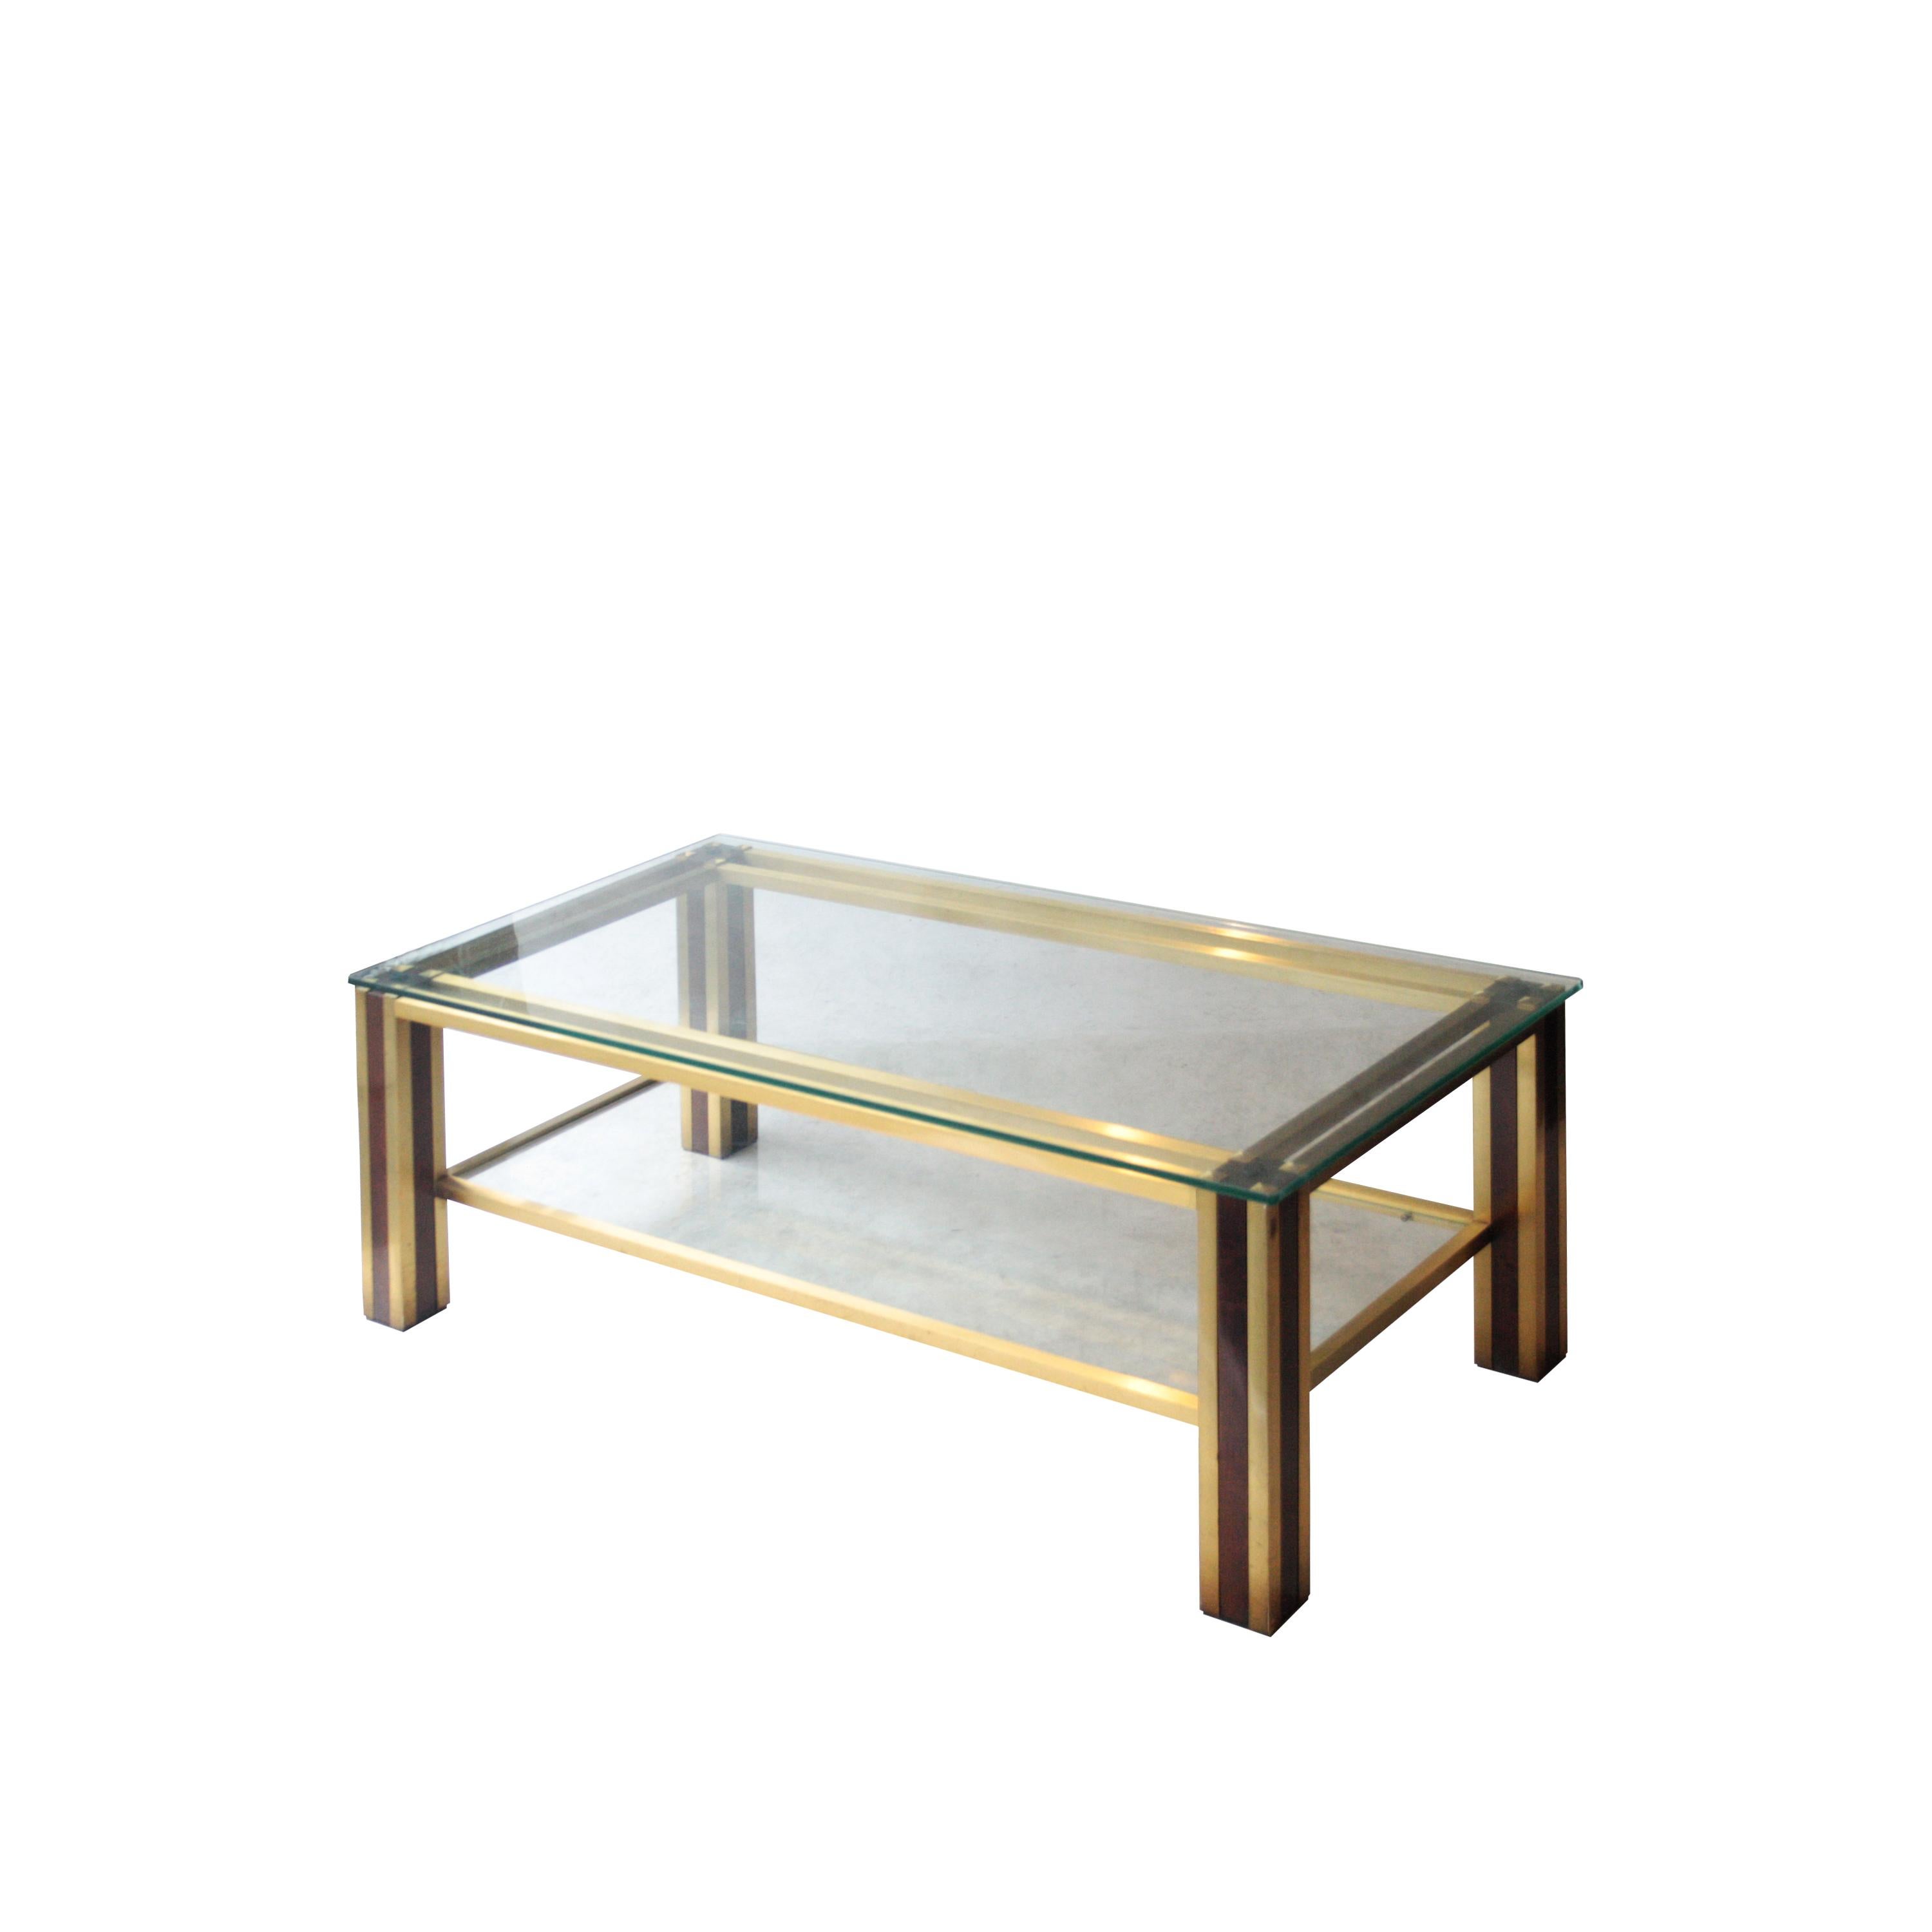 Coffee table with brass structure and solid wood with top and bottom shelf glass, brass details finished in a pyramidal shape.
 